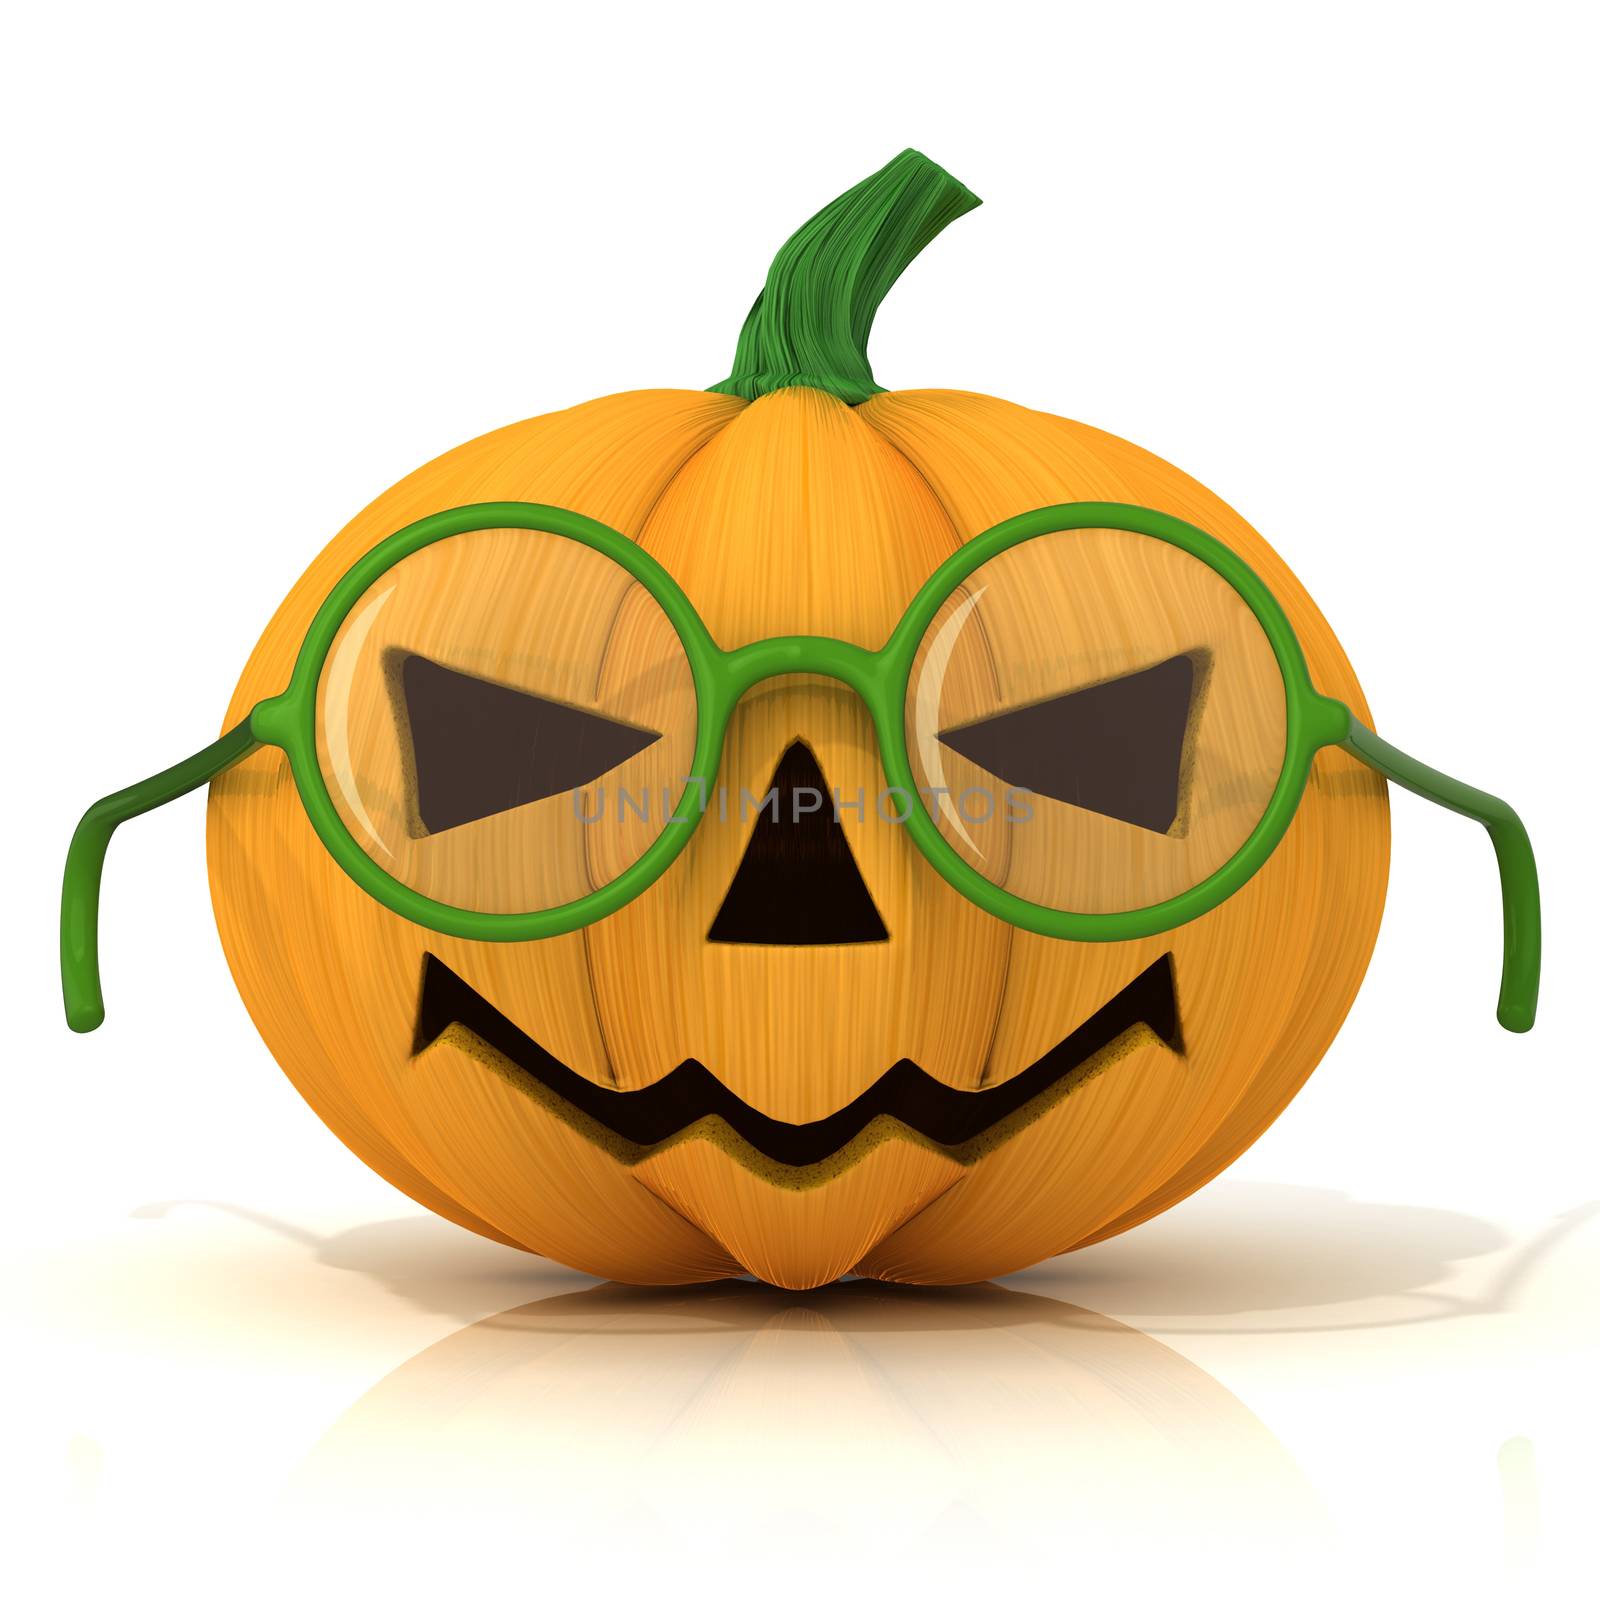 Funny Jack O Lantern. Halloween pumpkin with green glasses by djmilic